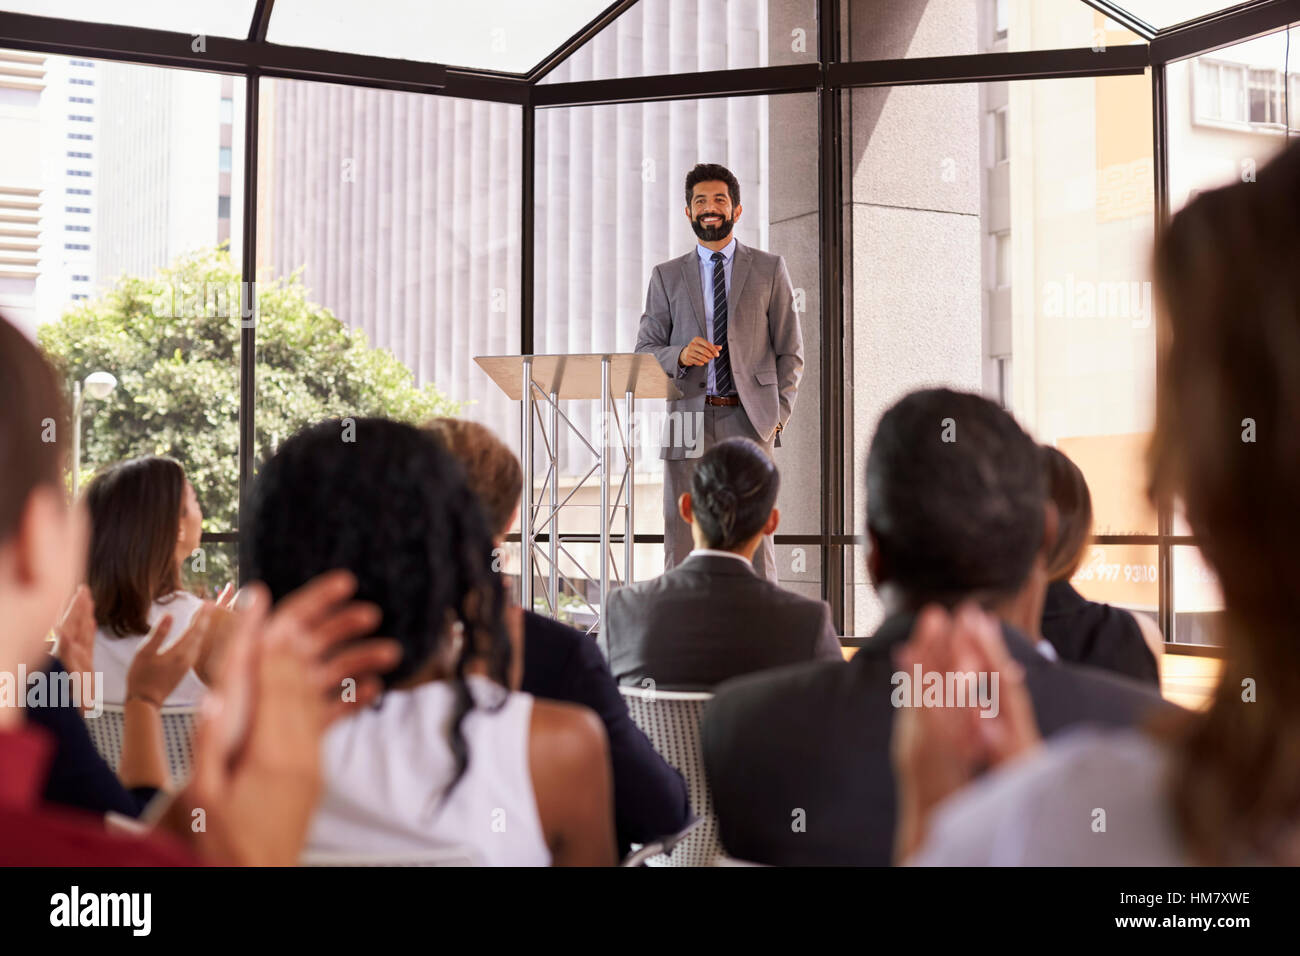 Audience applauding speaker at a business seminar Stock Photo